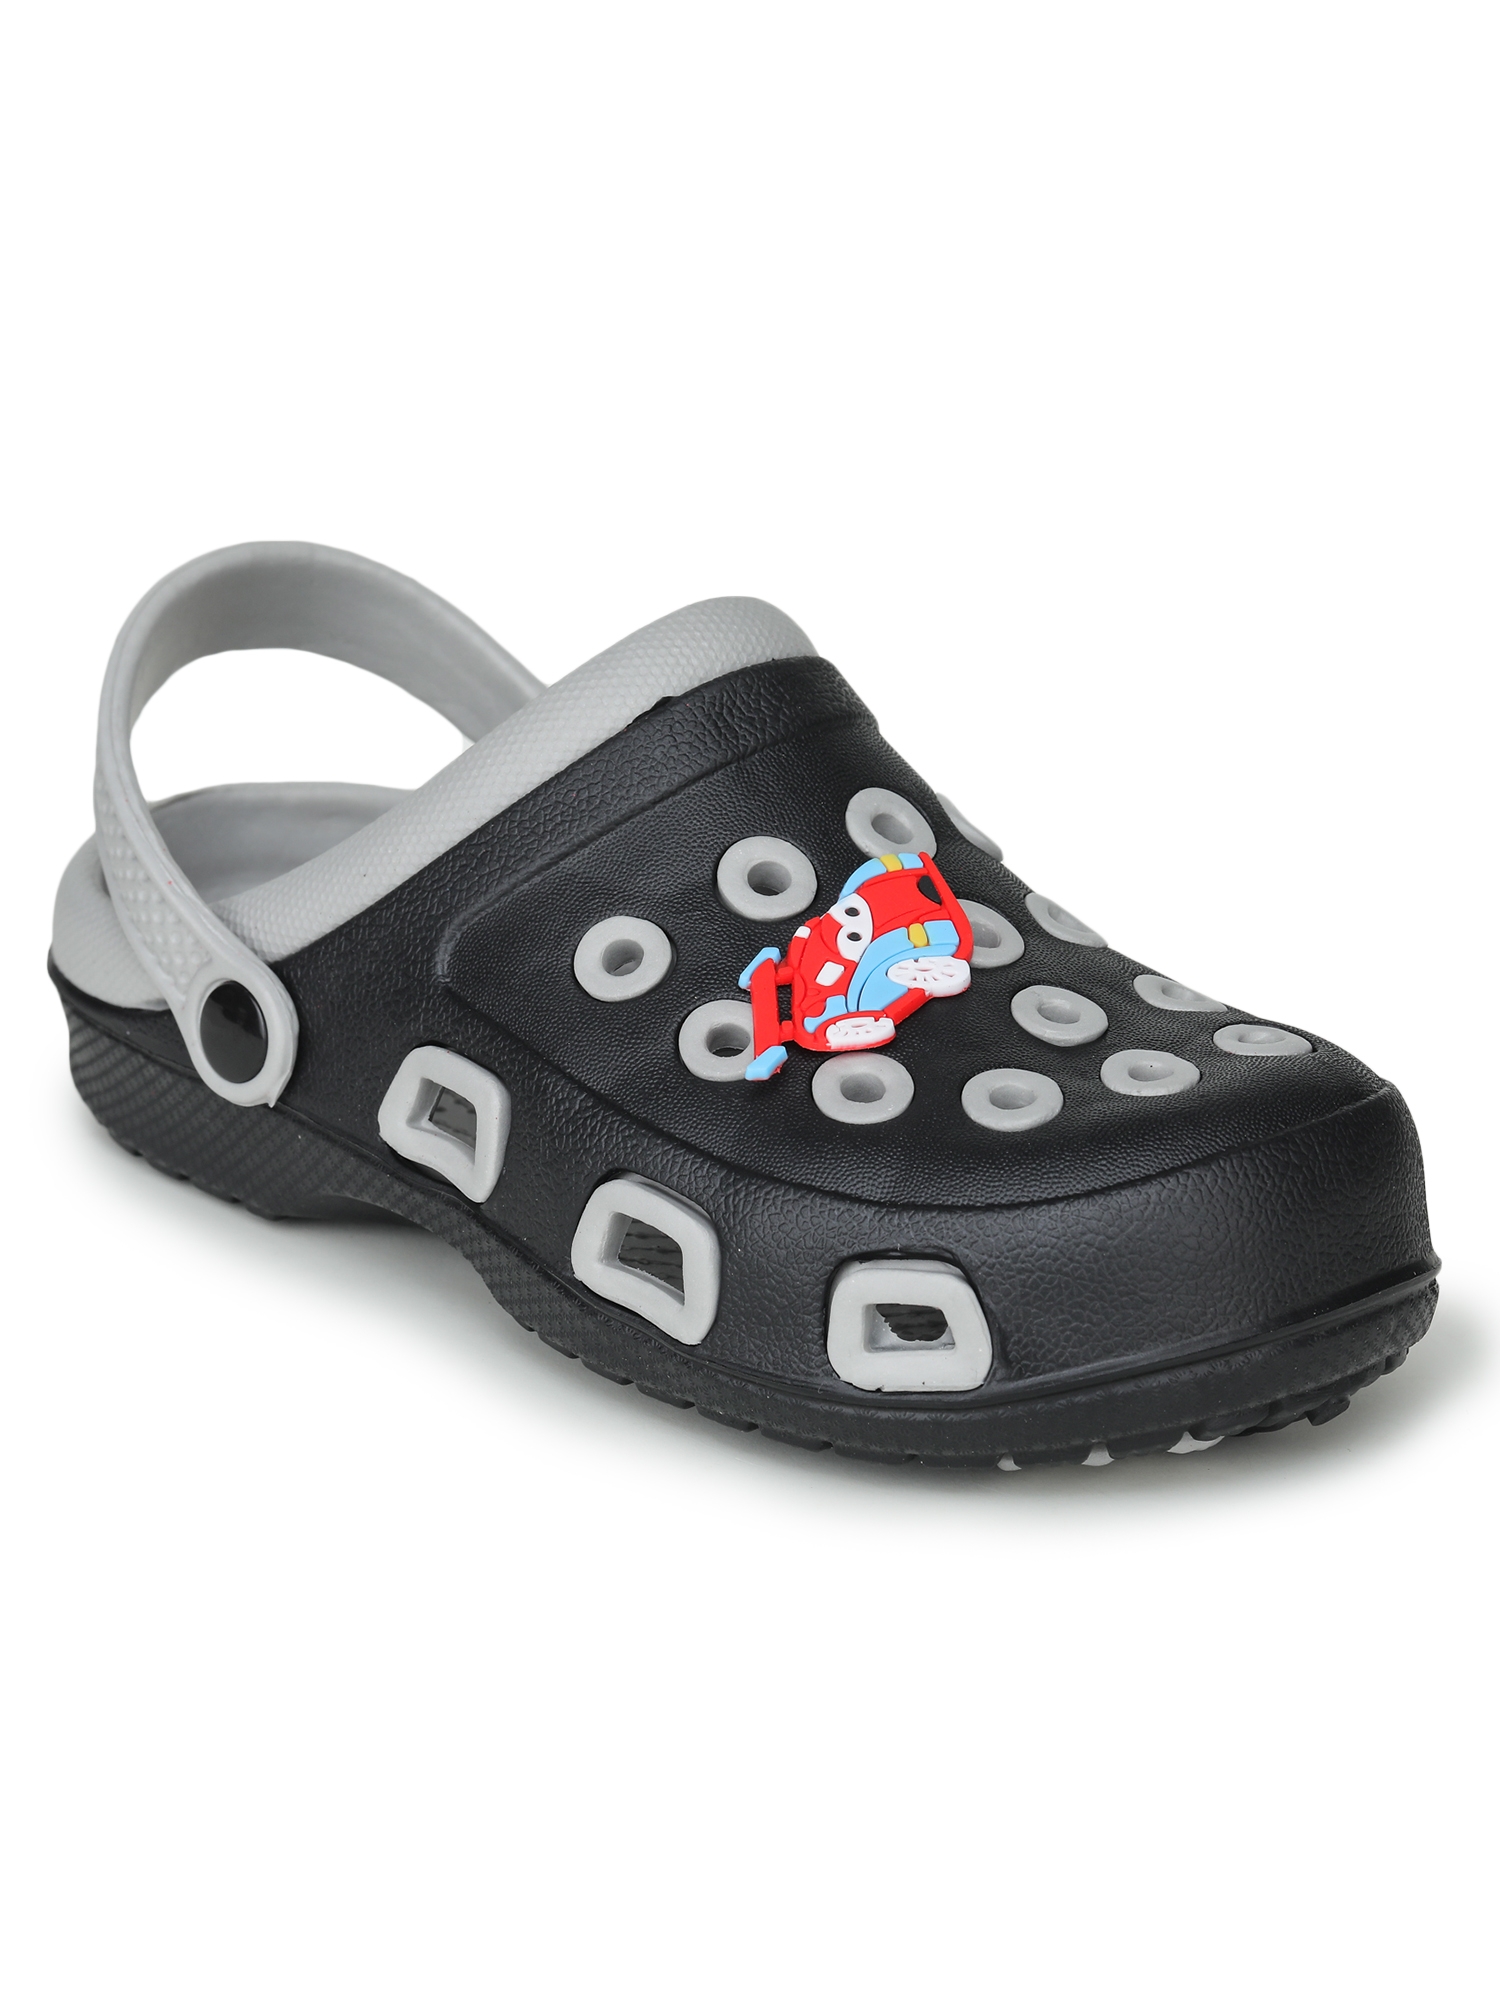 EASY TO GO LIGHT WEIGHT BLACK CLOGS FOR BOYS & GIRLS 